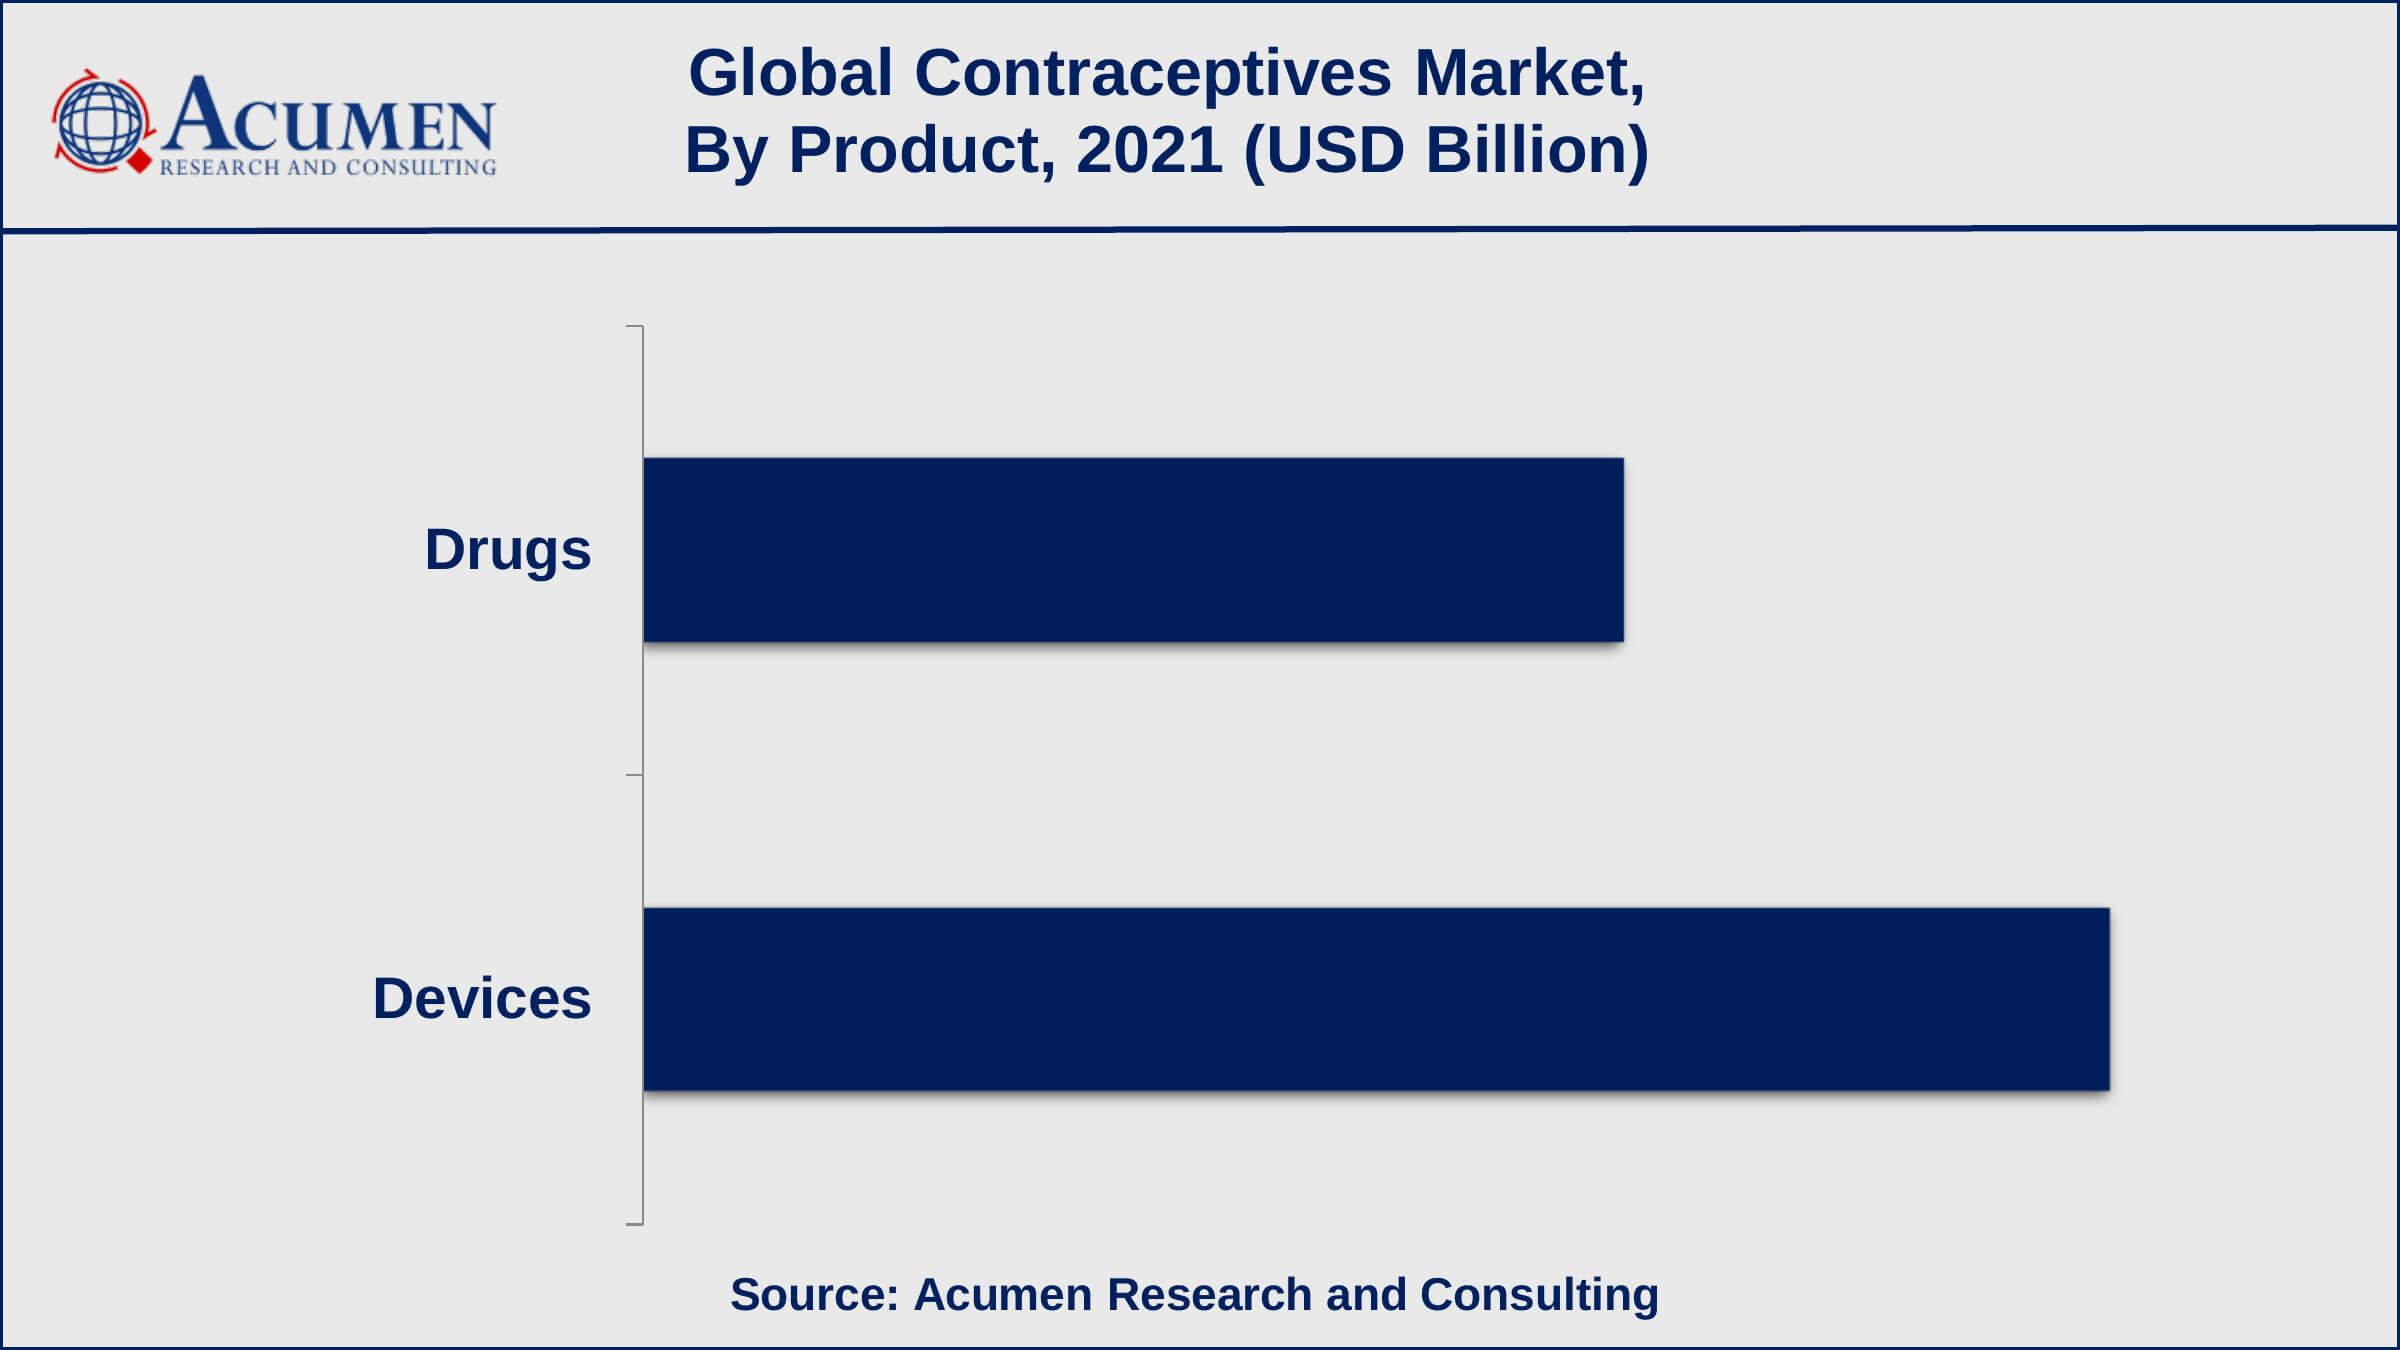 Based on product, contraceptive devices recorded USD 15.36 billion revenue in 2021